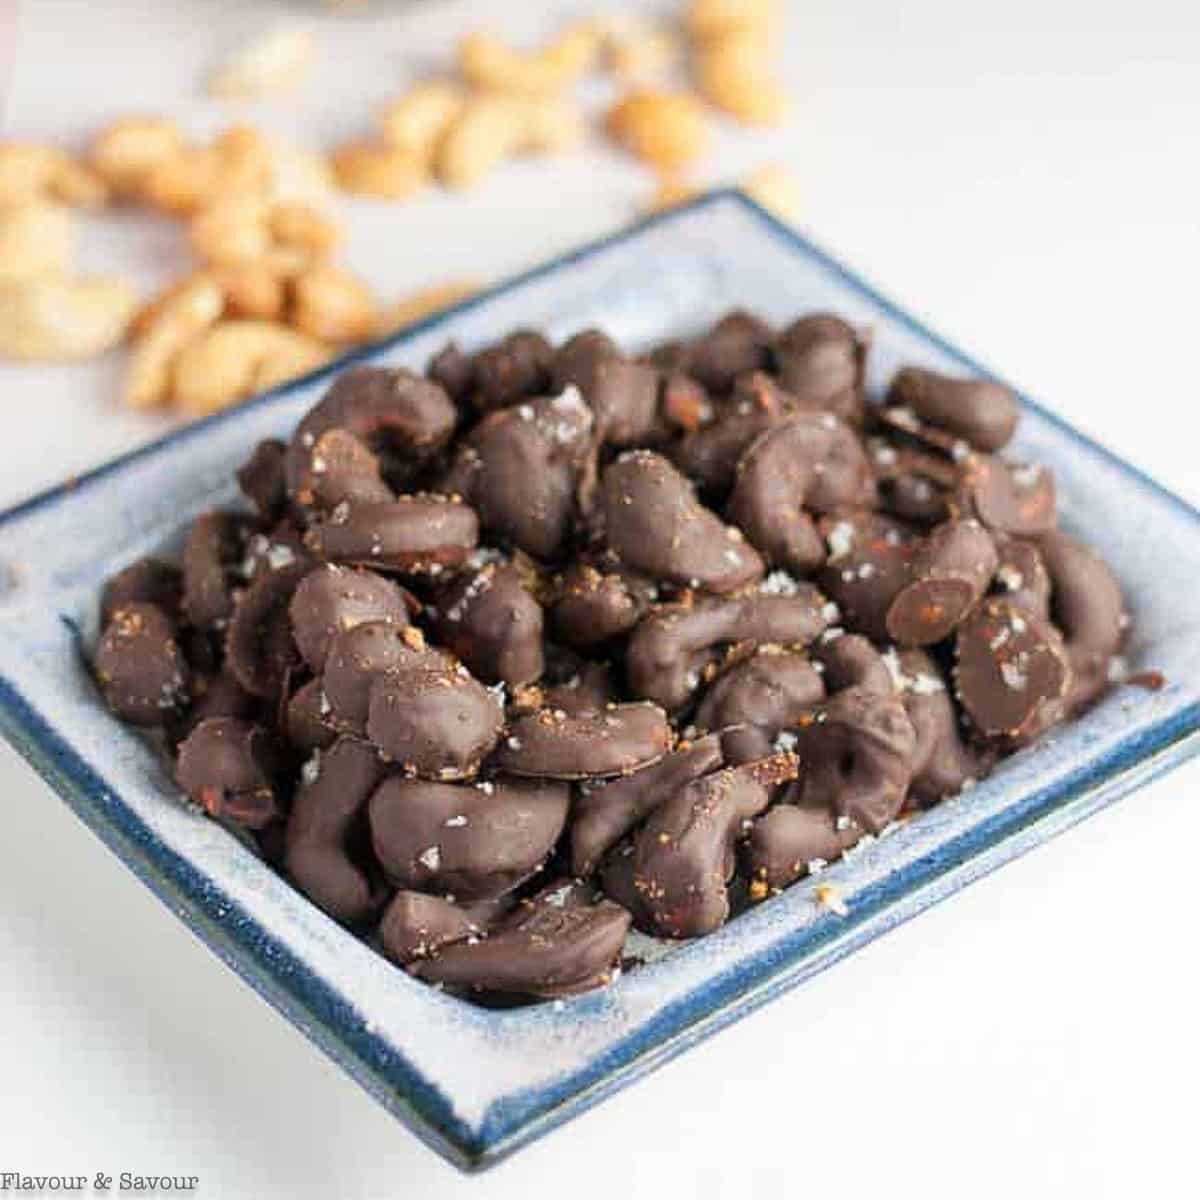 A serving dish with chocolate covered cashews with sea salt.